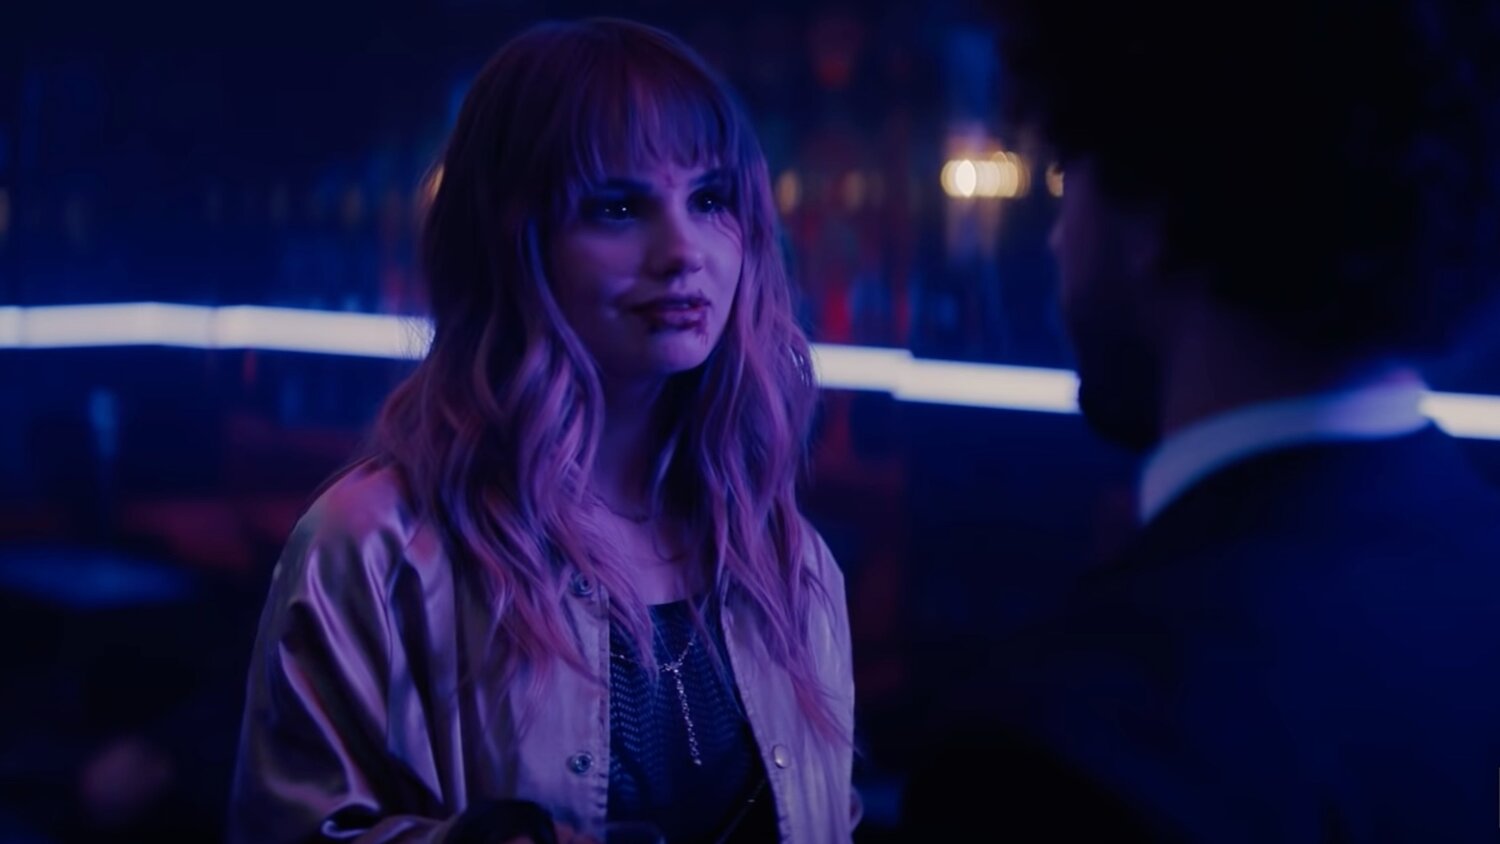 Fun For Netflix's Vampire Action Thriller NIGHT TEETH with Debby Ryan, Lucy Fry, and Megan Fox